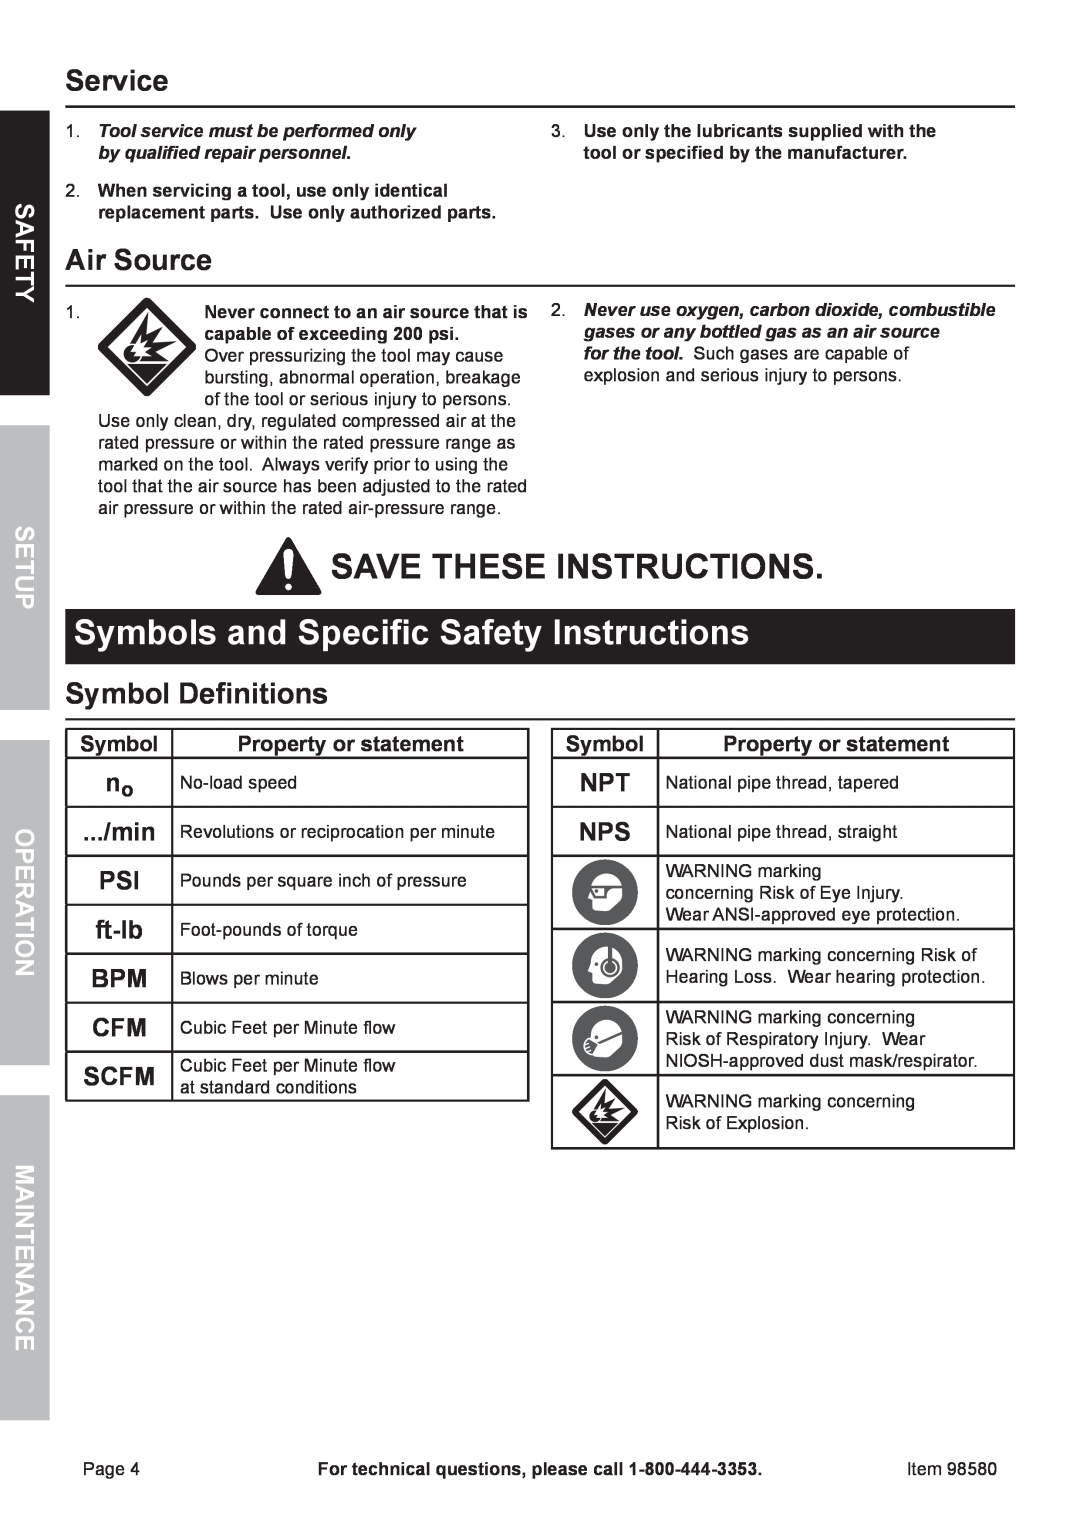 United States Pumice Company 98580 Save these instructions. Symbols and Specific Safety Instructions, Service, Air Source 